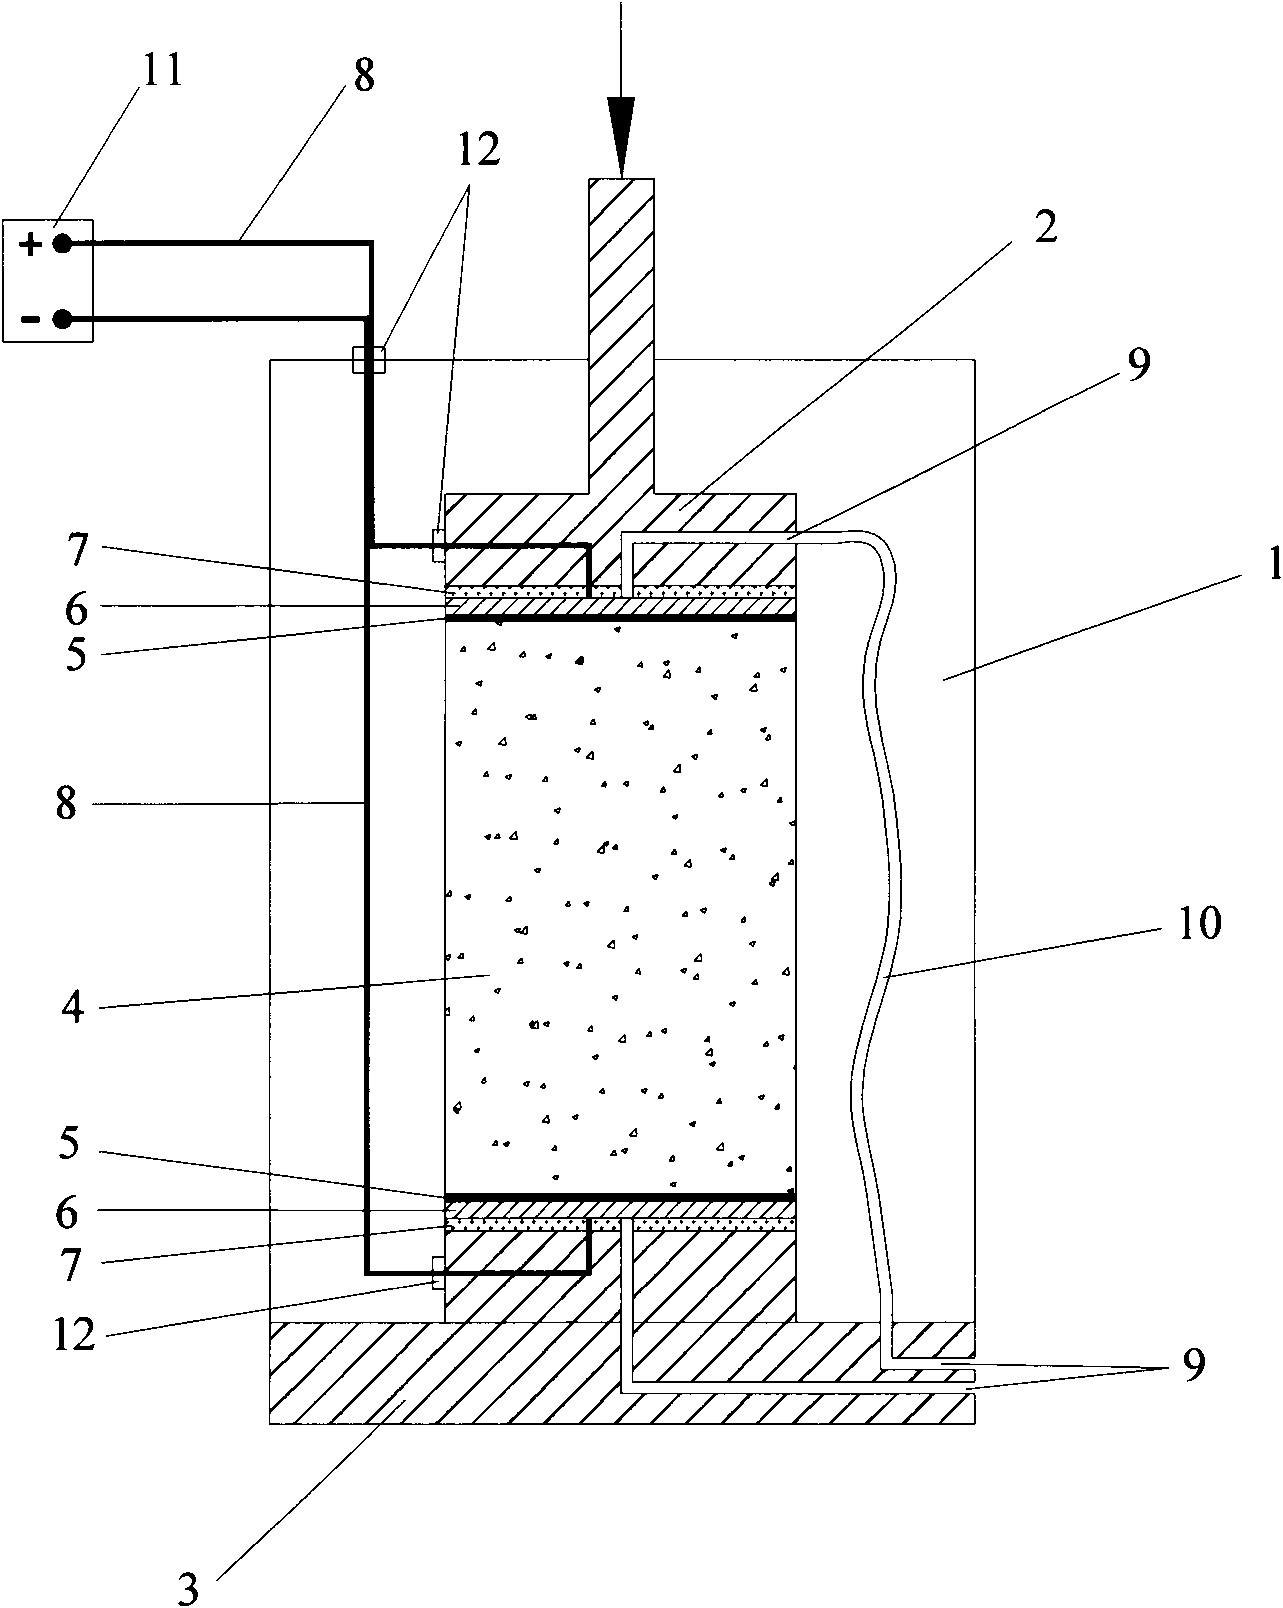 Electro-osmotic consolidation method of large triaxial test of gravel admixture